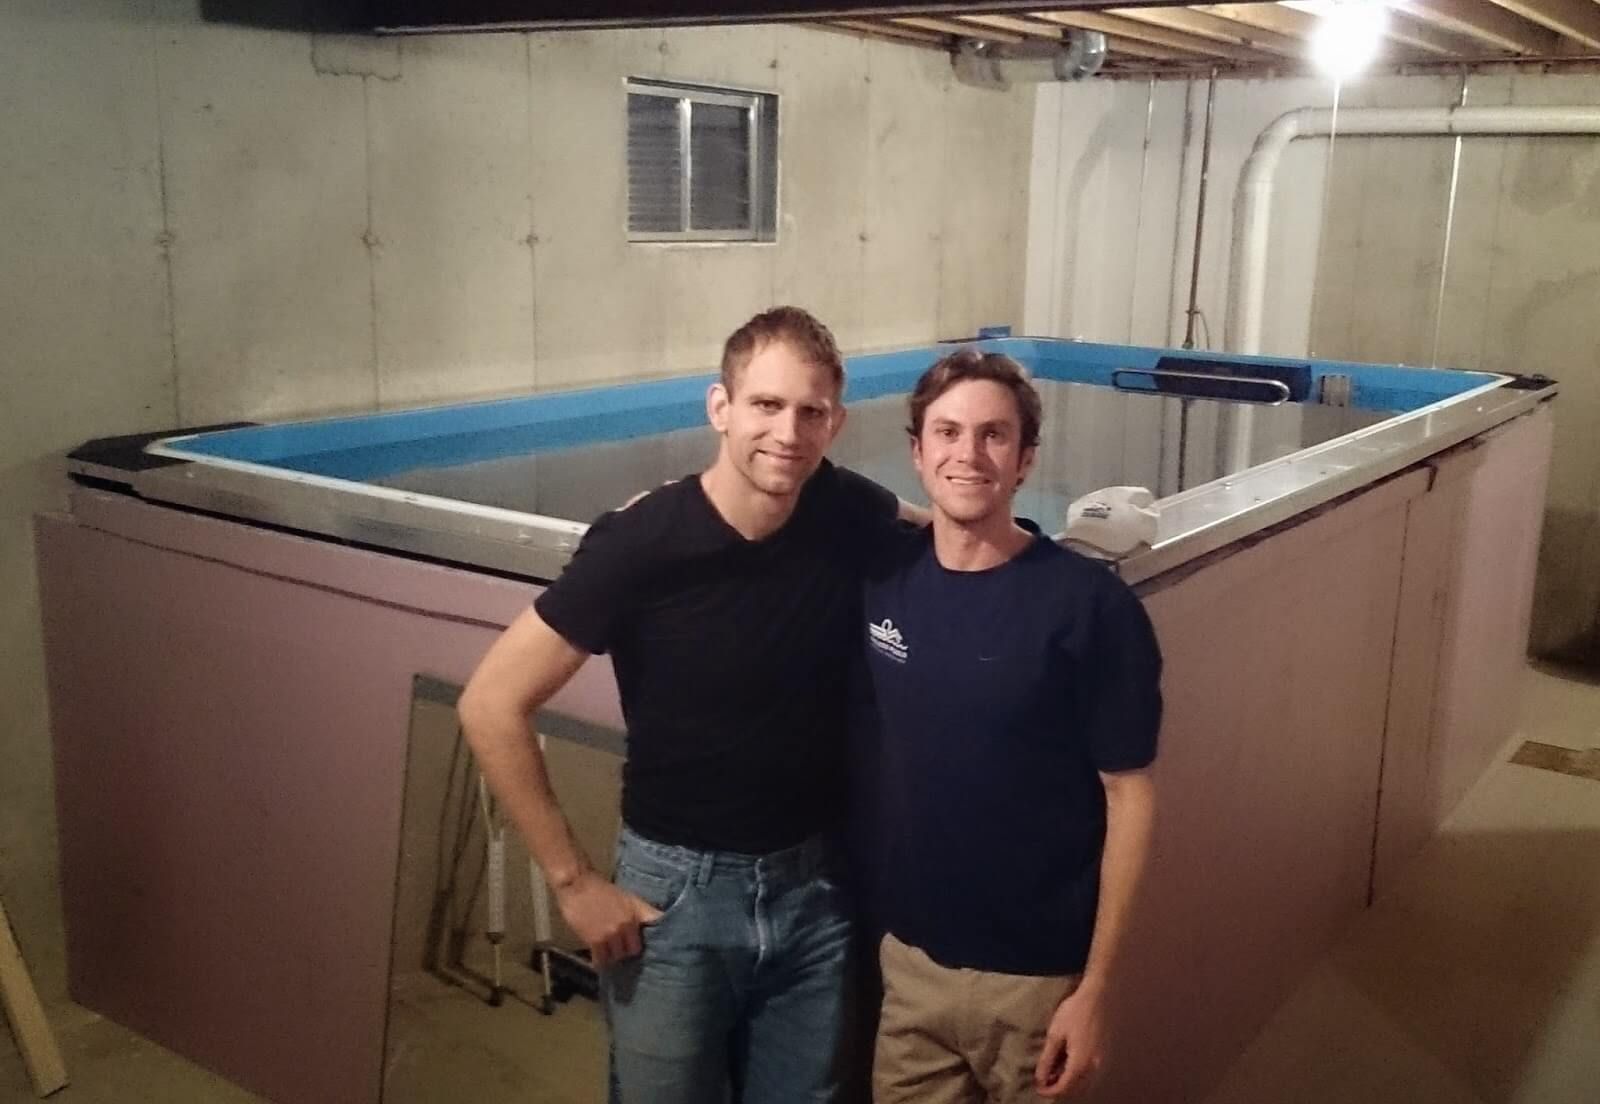 Professional triathlete Andrew Starykowicz with the Endless Pool in his basement